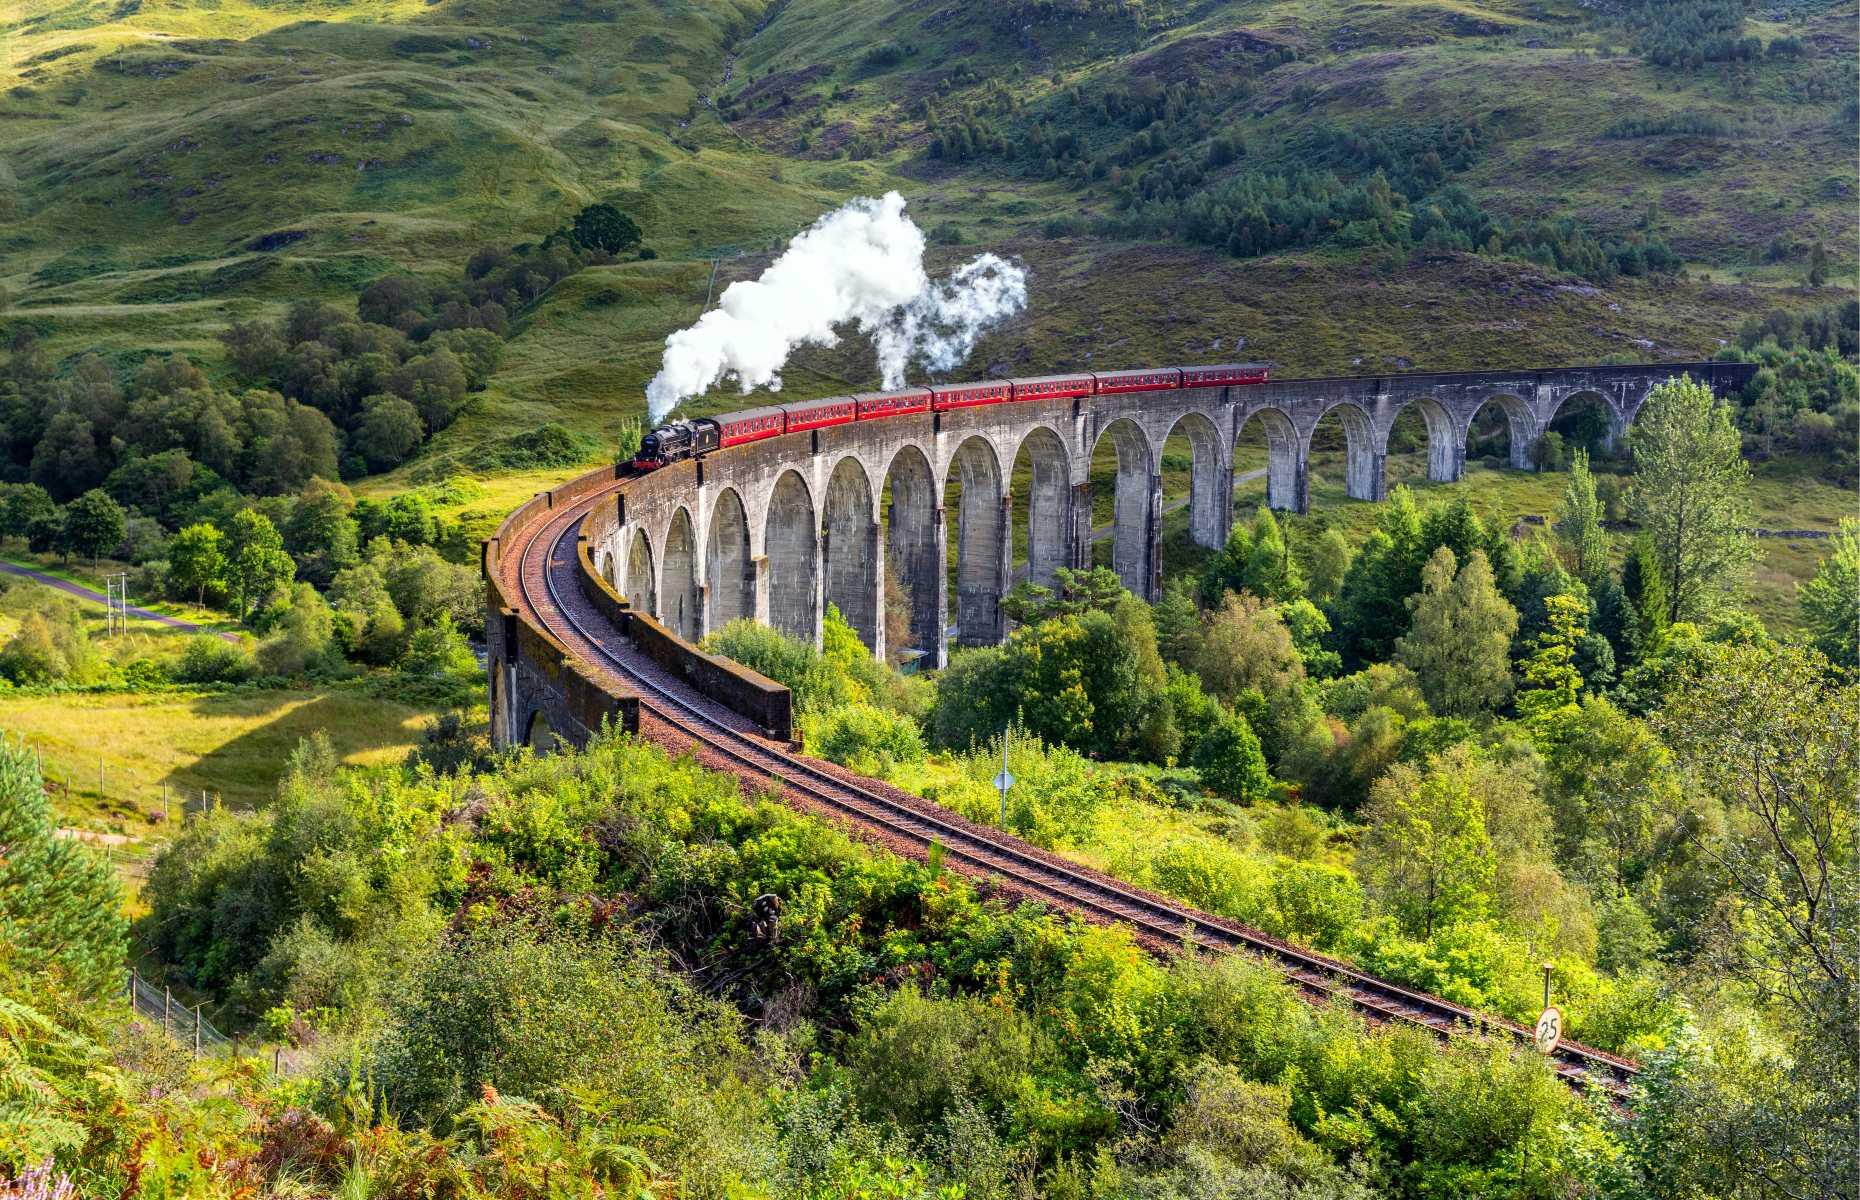 <p>Often considered one of the greatest railway journeys in the world, this <a href="https://westcoastrailways.co.uk/jacobite/steam-train-trip">84-mile (135km) round trip</a> takes passengers on the West Highland Line through some of Scotland’s most impressive attractions. The Jacobite steam train starts at Ben Nevis, Britain’s highest mountain, closely passing by the deepest loch and the shortest river in Britain, Loch Morar and River Morar, respectively. The train rounds off the incredible journey at Loch Nevis near the fishing port of Mallaig. Some may recognise the train carriages and the Glenfinnan Viaduct en route as the iconic Hogwarts Express from the <em>Harry Potter </em>films.</p>